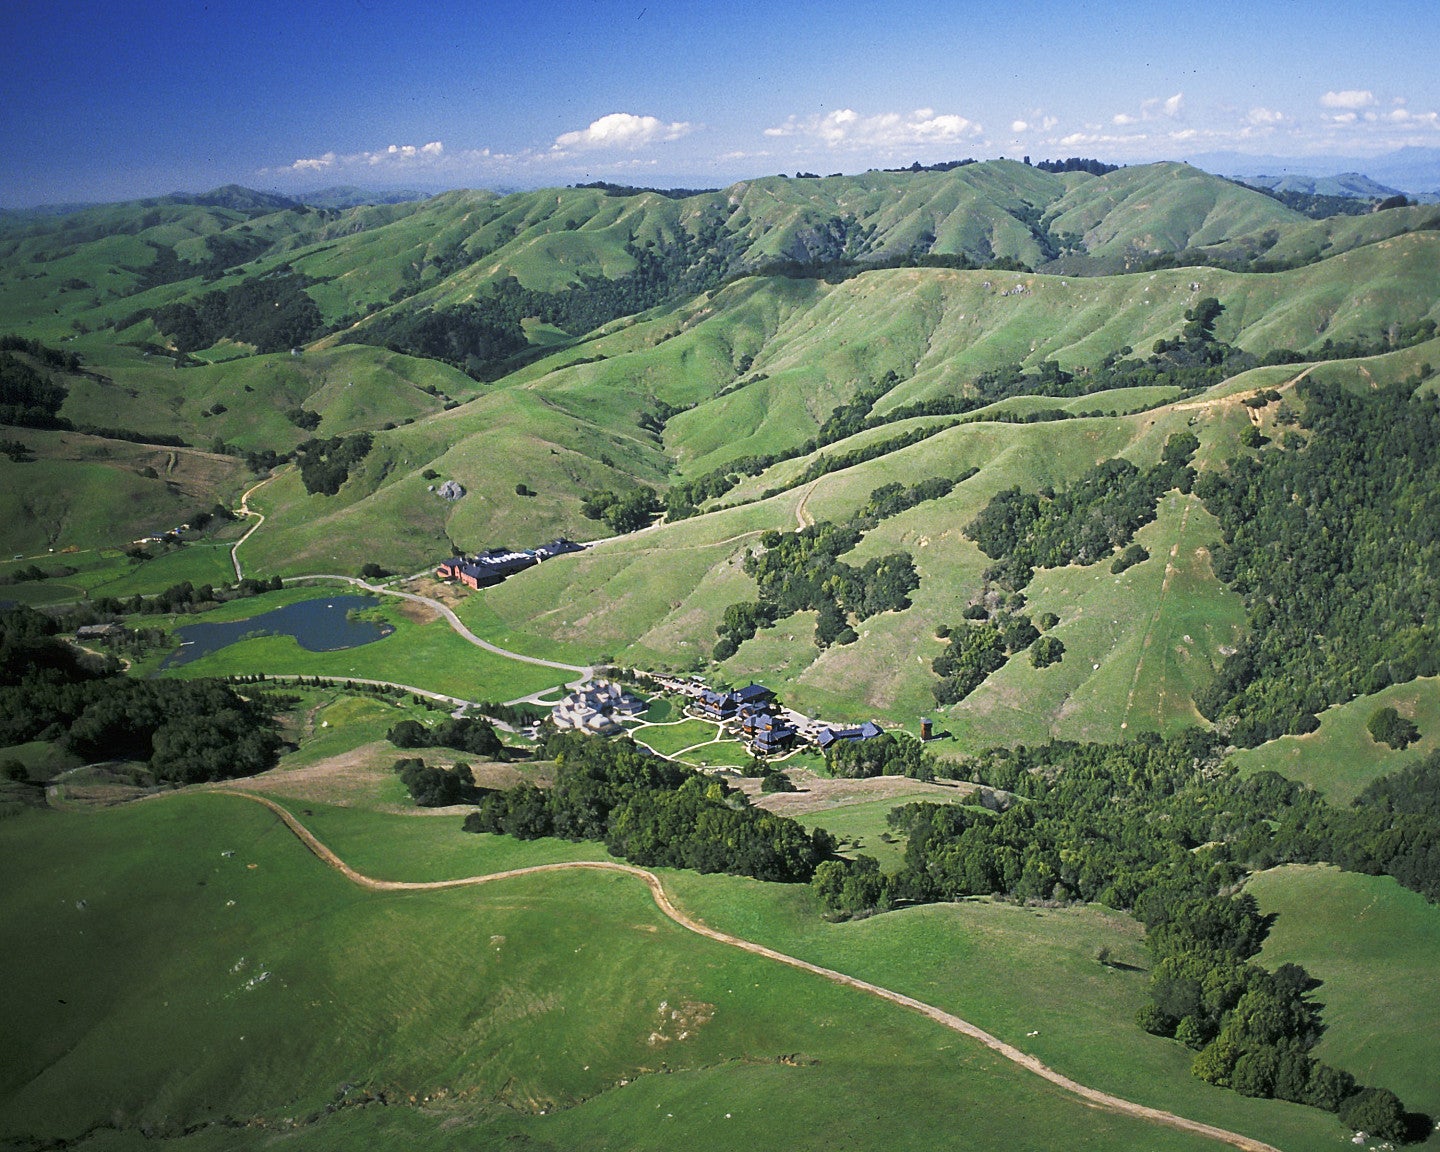 Skywalker Ranch, set in a 5,000 acres preserve in Marin County, California.